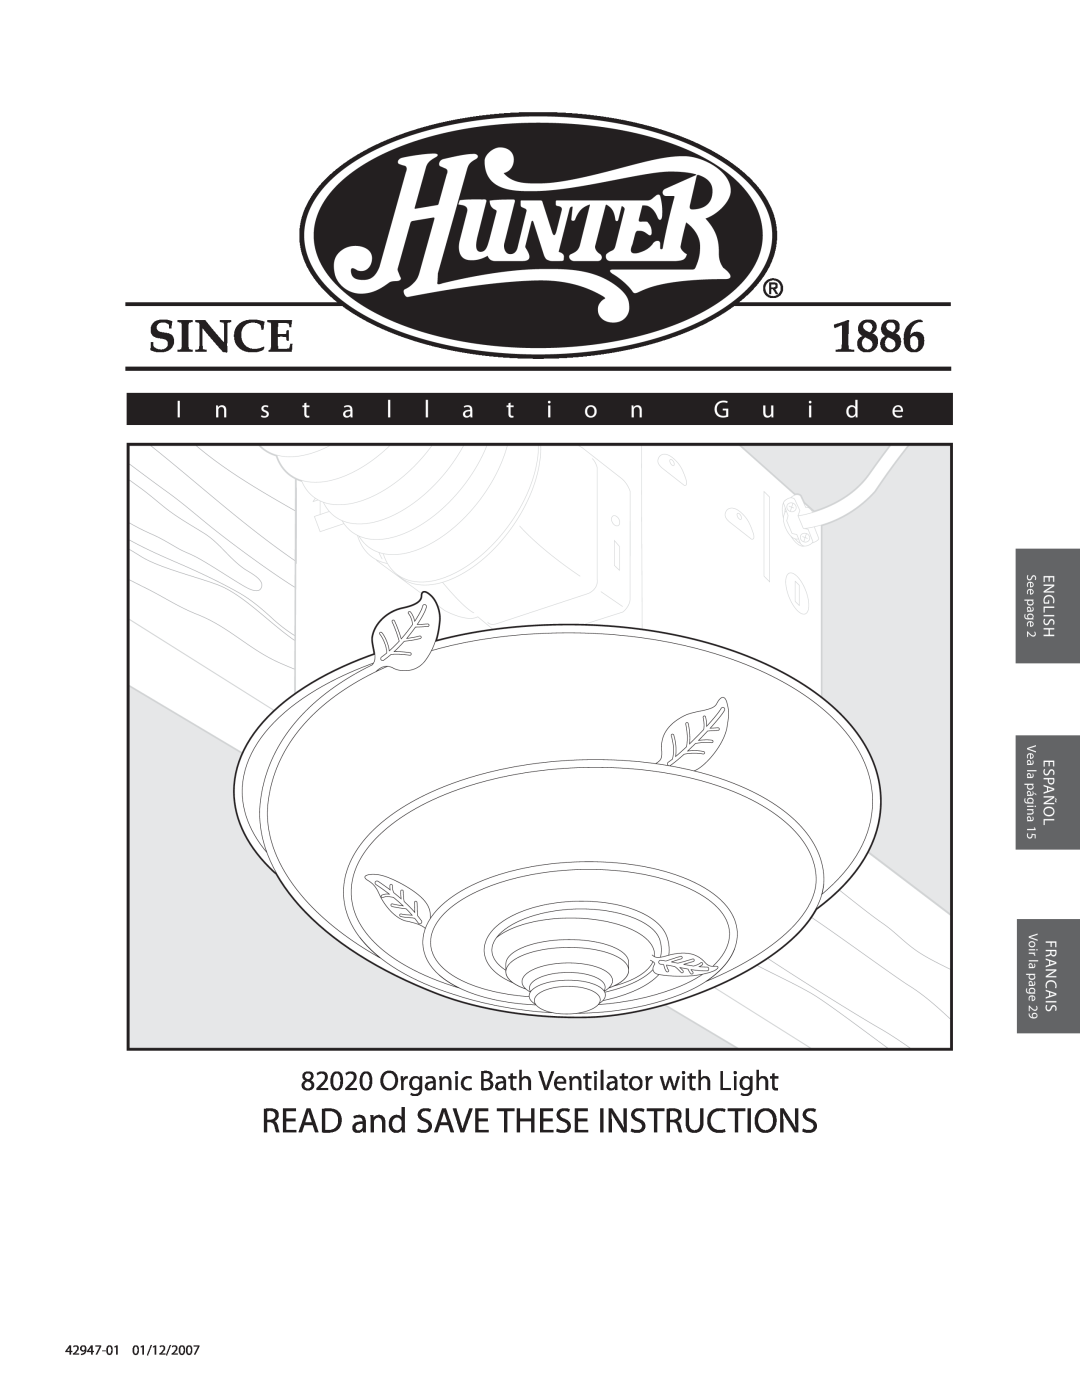 Hunter Fan 42947-01 manual READ and SAVE THESE INSTRUCTIONS, Organic Bath Ventilator with Light, I n s t a l l a t i o n 